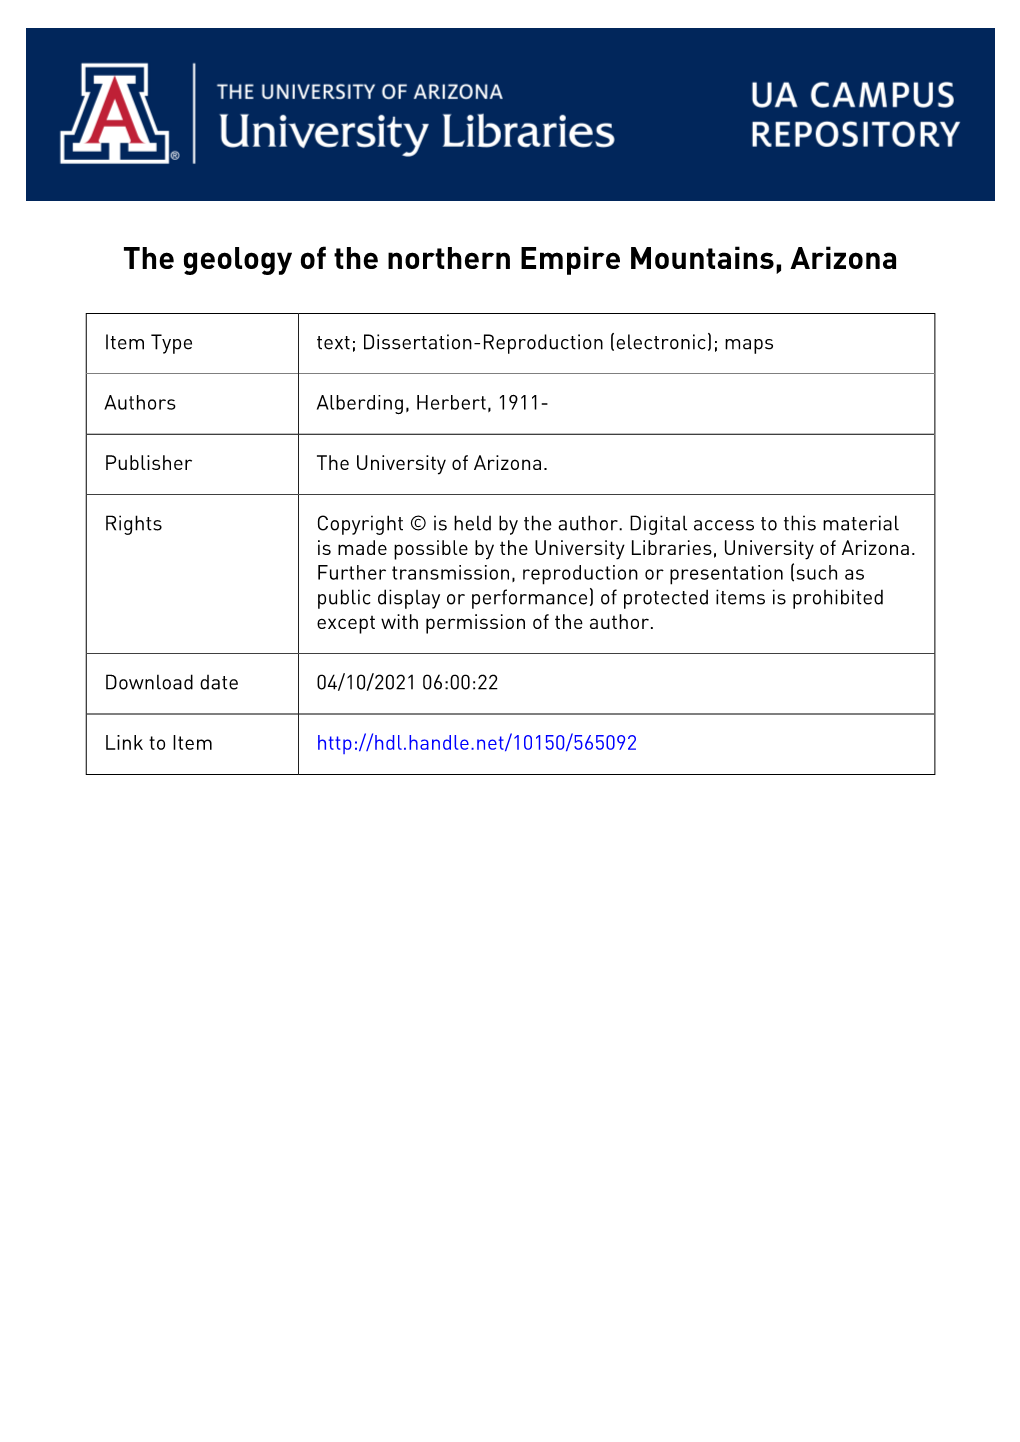 The Geology of the Northern Empire Mountains, Arizona by Herbert